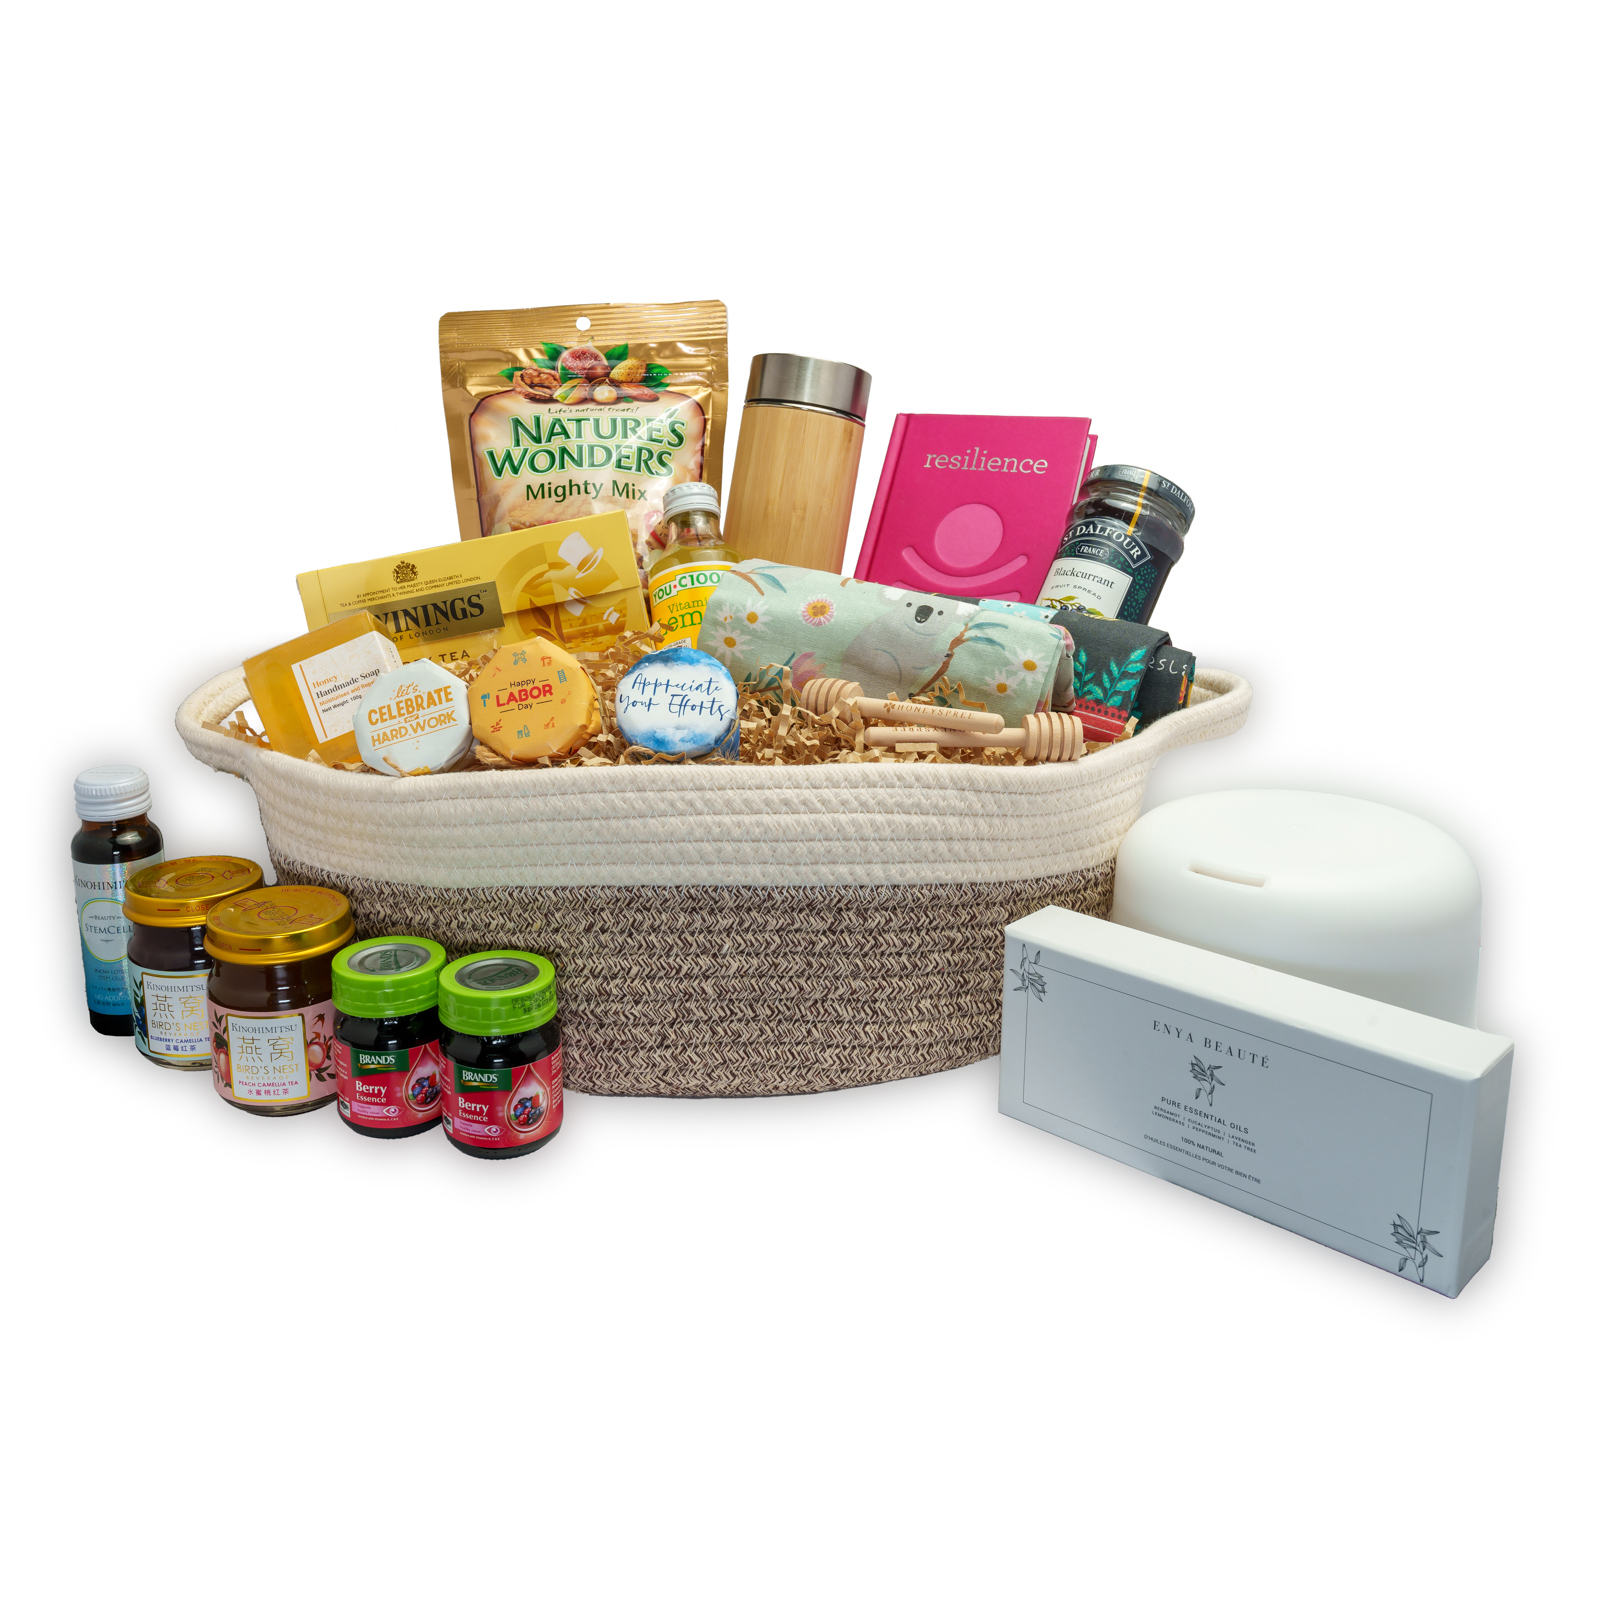 Deluxe Labor Day Basket Set